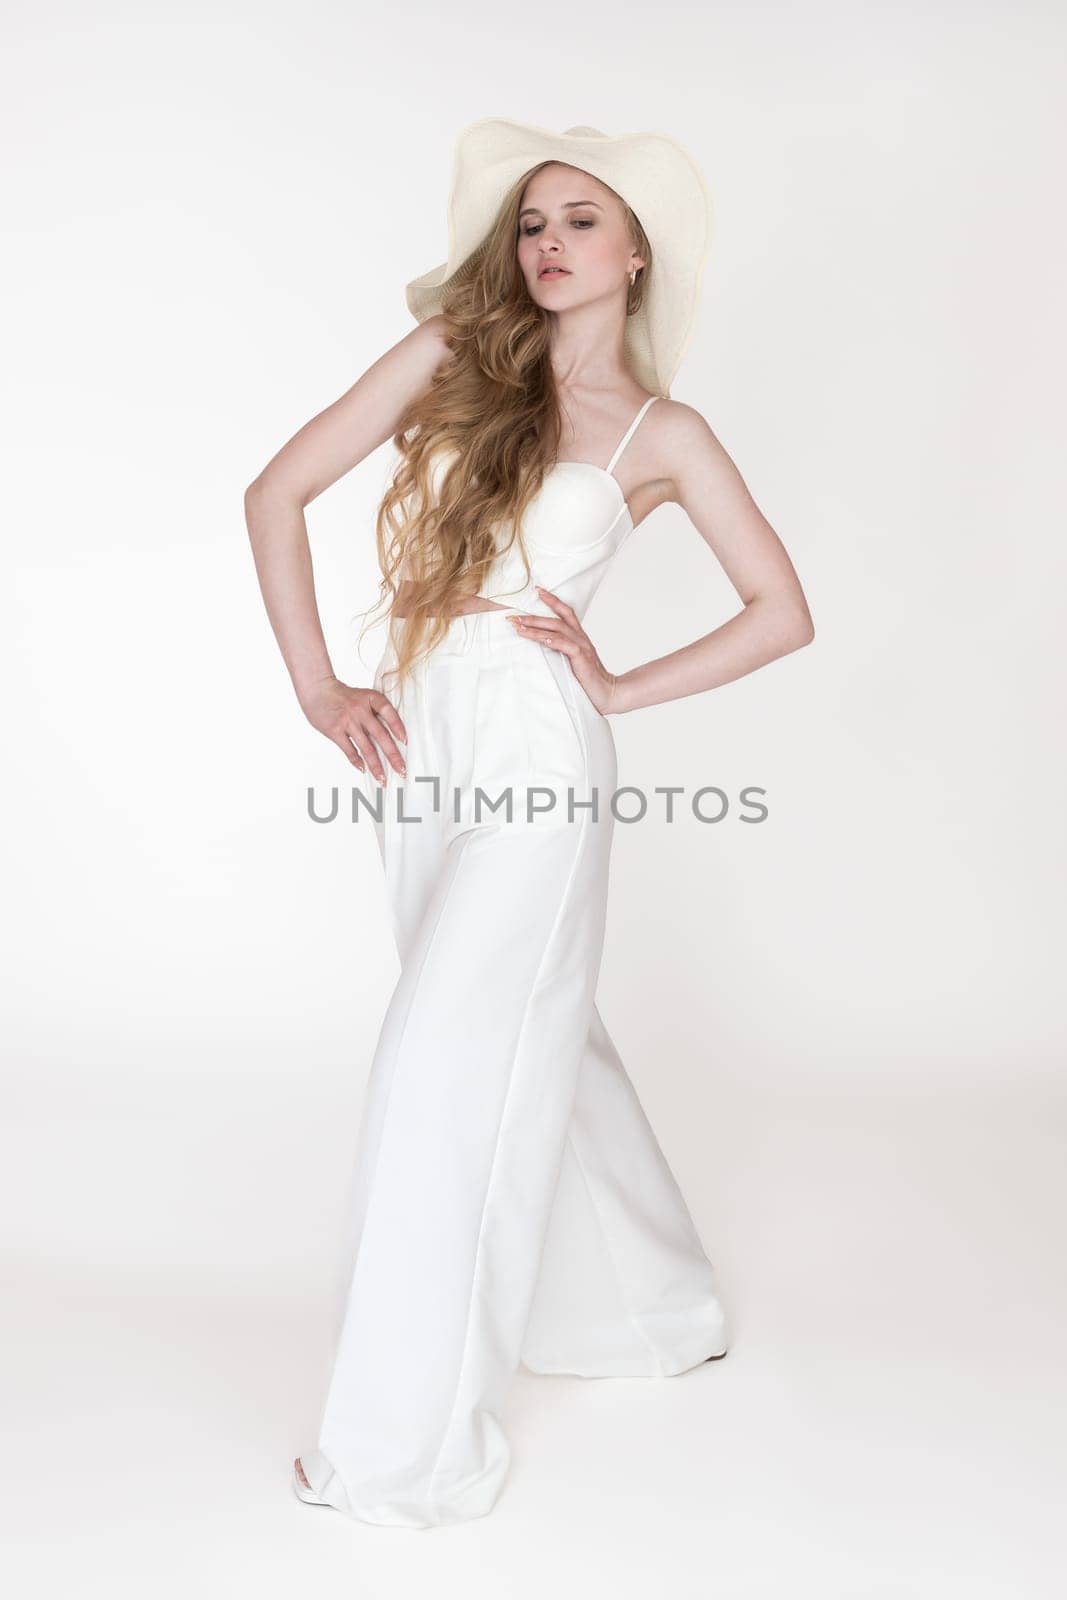 Full length portrait of young blondie fashion model 21 year old with wavy long hair in straw hat, white sculpting cupped corset top and pants standing on white background. Caucasian woman looking down